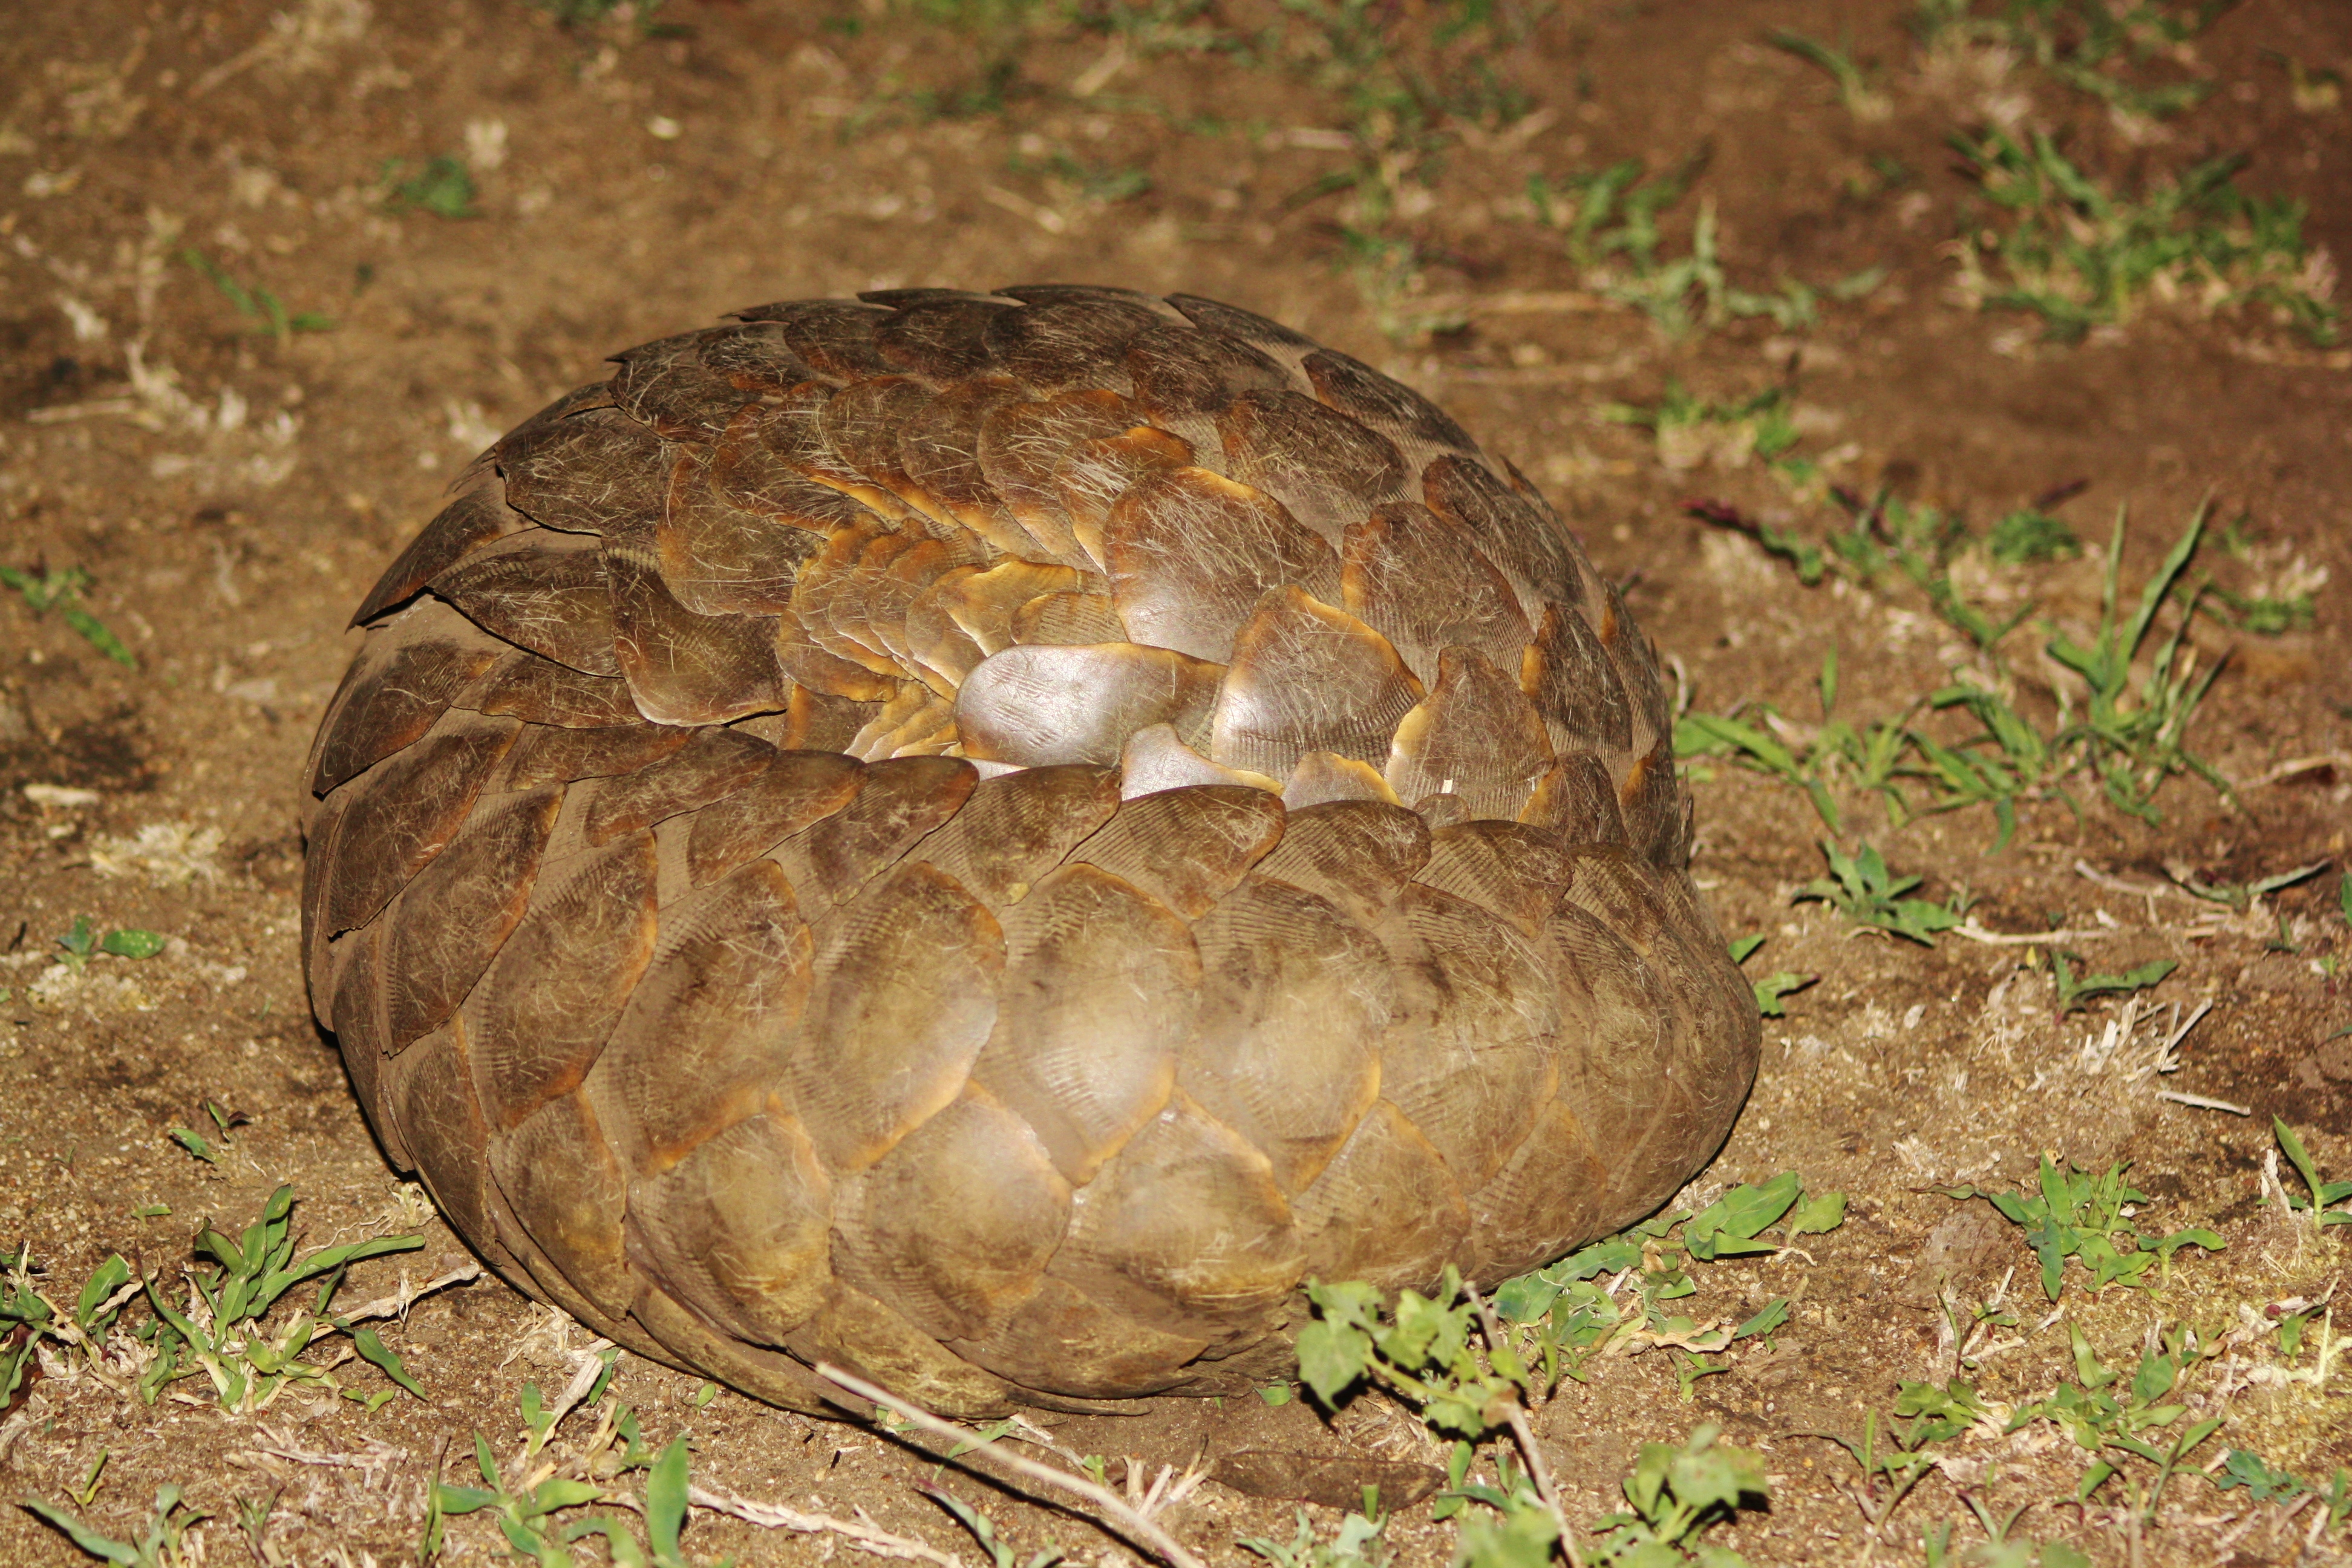 The rare pangolin spotted on a night drive from Rhino Post Safari Lodge by guide Joey Vermeulen